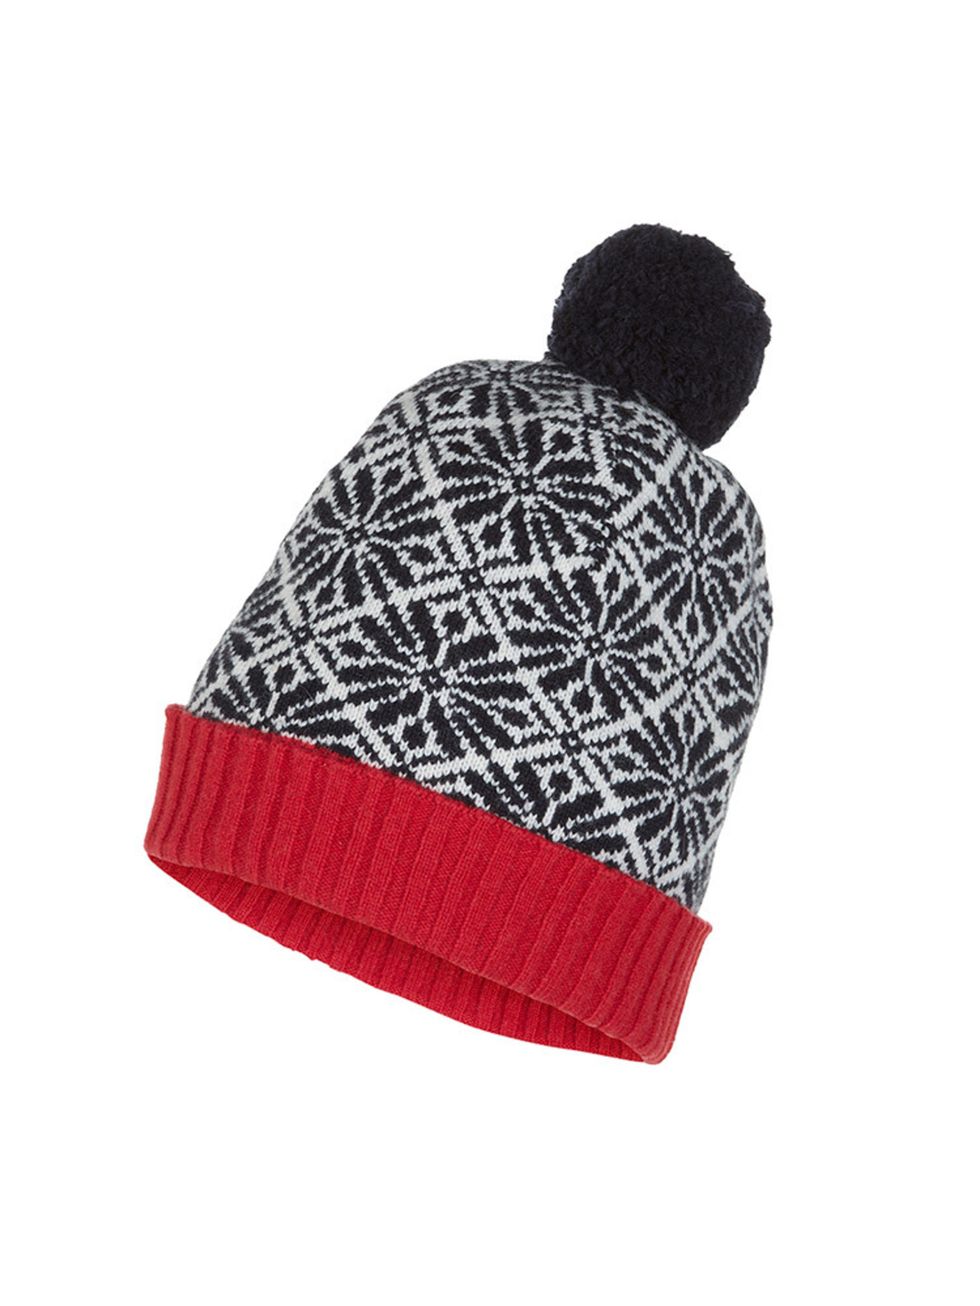 <p>This printed bobble hat is a fun way to keep warm.</p>

<p><a href="http://www.hobbs.co.uk/product/display?productID=0214-1837-388200&refpage=accessories/hats-umbrellas" target="_blank">Hobbs bobble hat</a>, £25.</p>